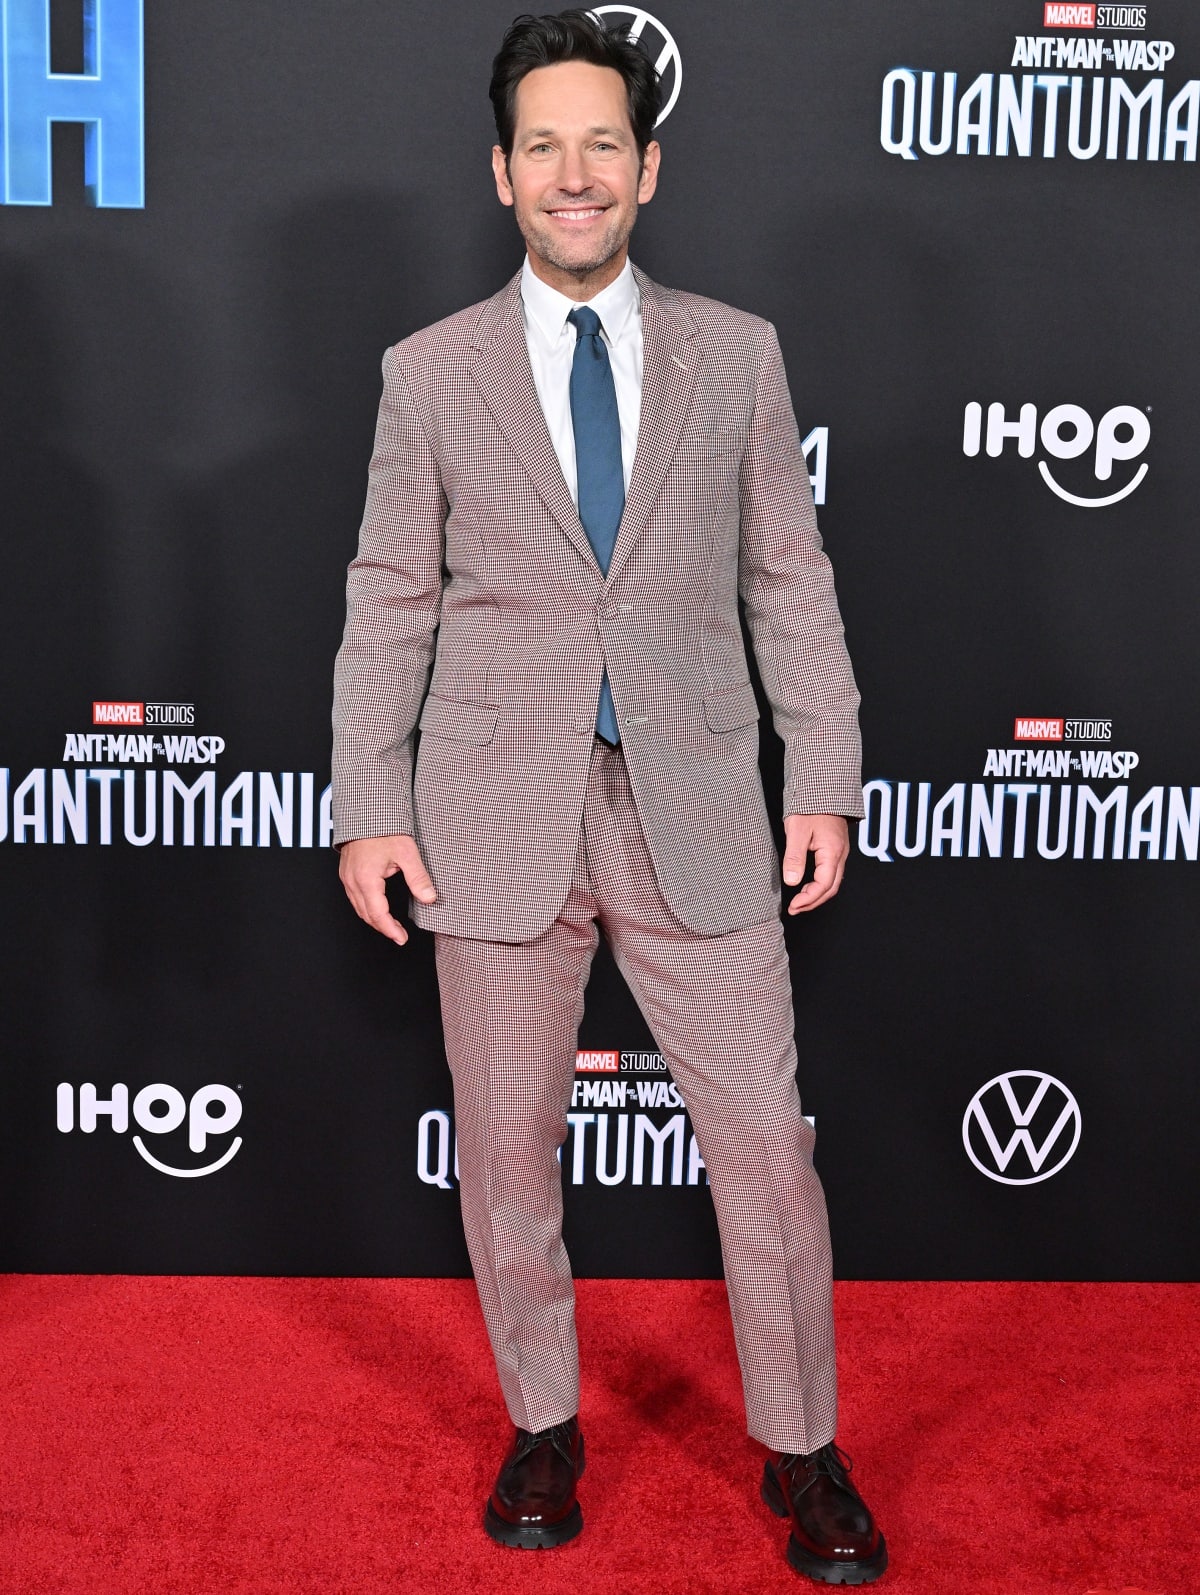 Paul Rudd wearing a Fendi suit at the premiere of Ant-Man and the Wasp: Quantumania